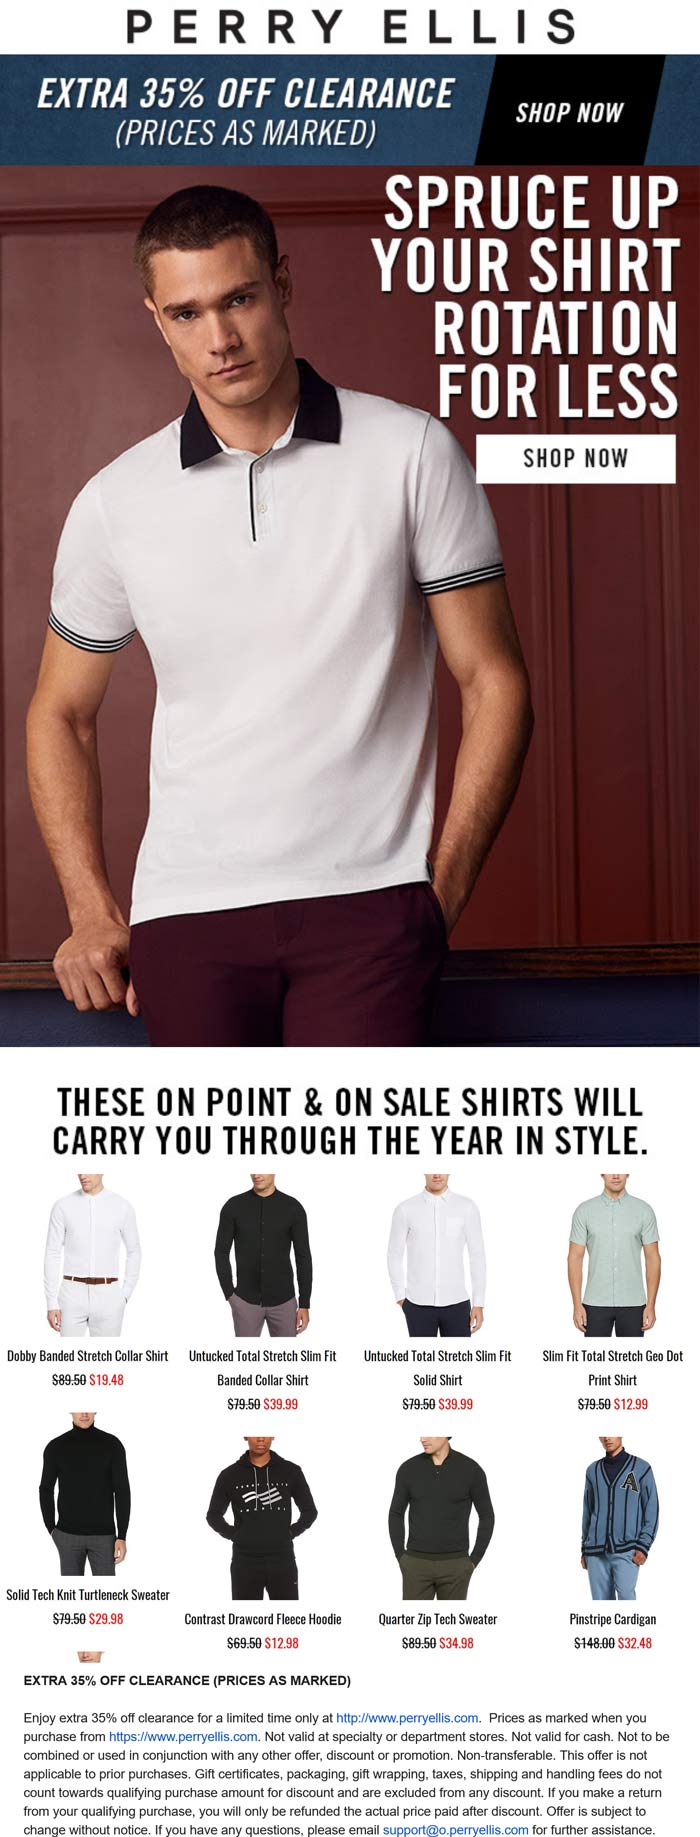 Extra 35% off clearance at Perry Ellis #perryellis